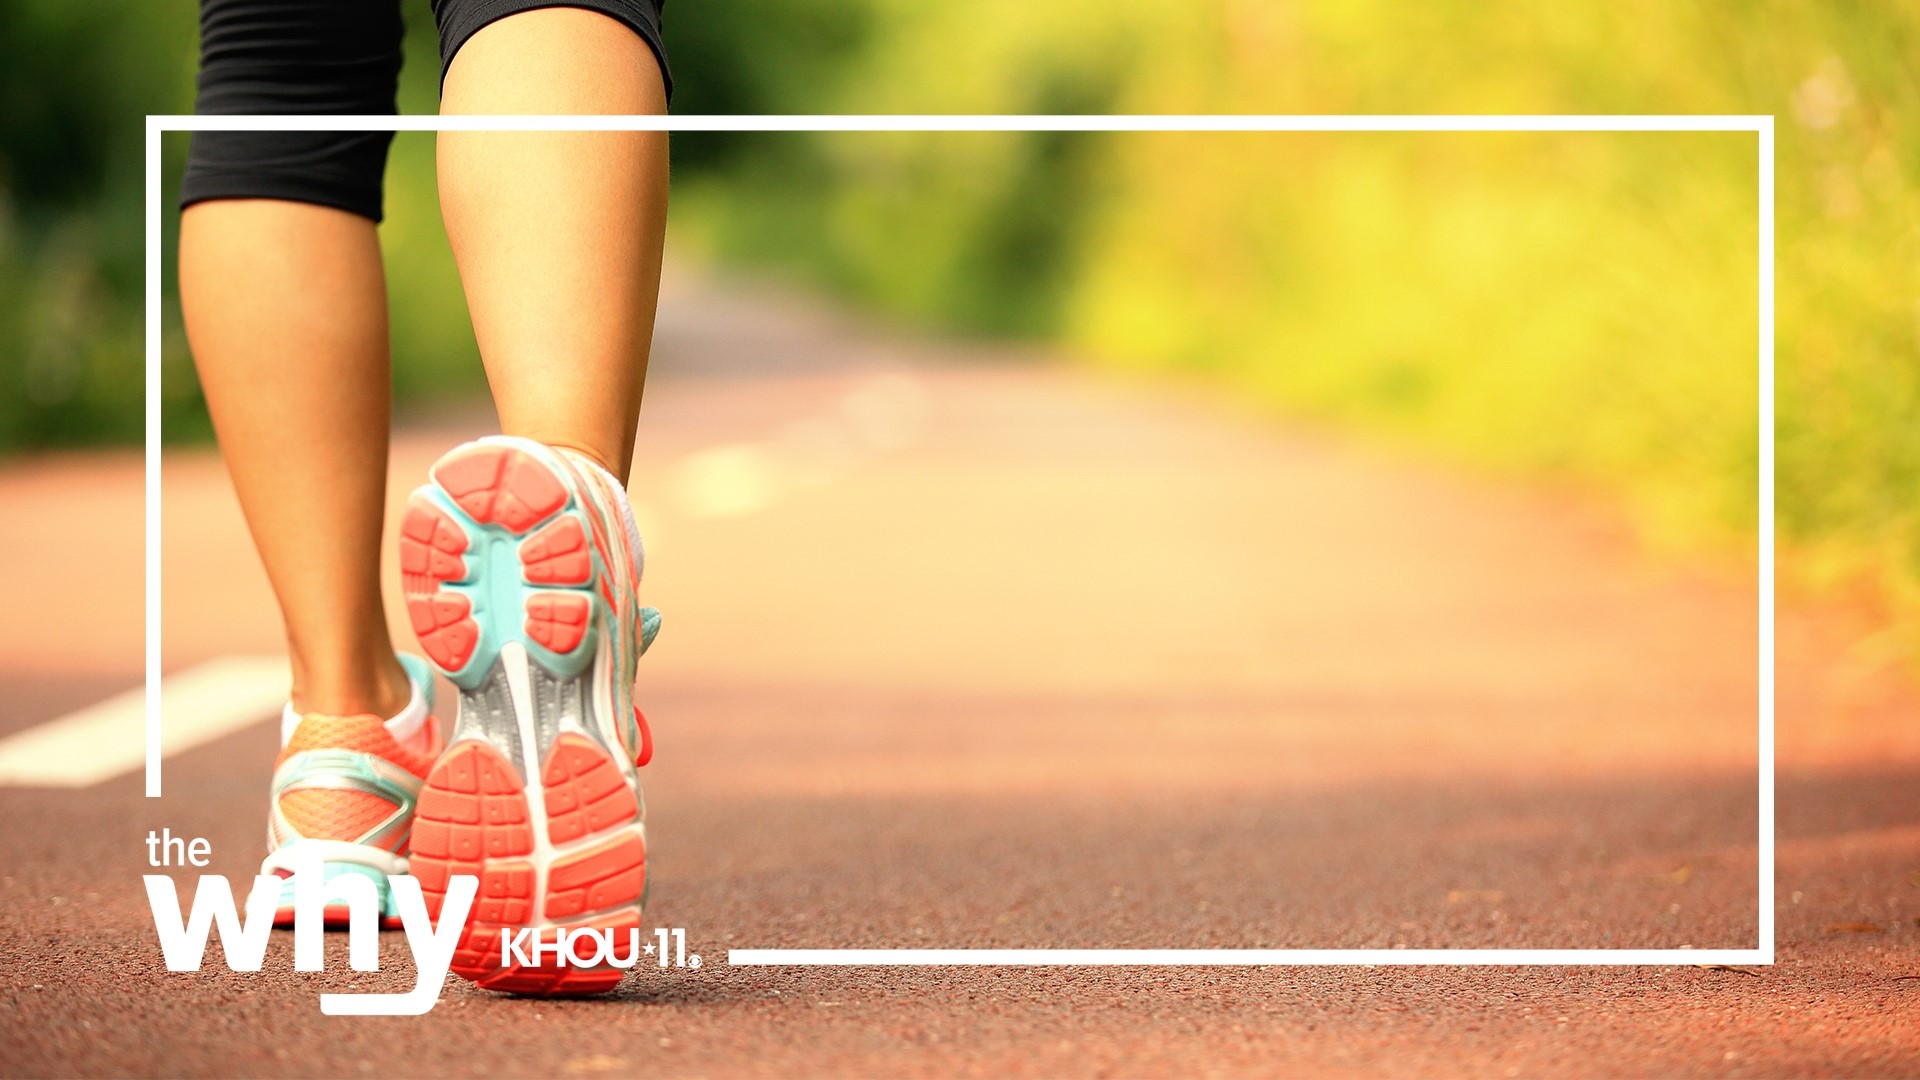 Researchers found just two minutes walking after a meal impacts your wellness.